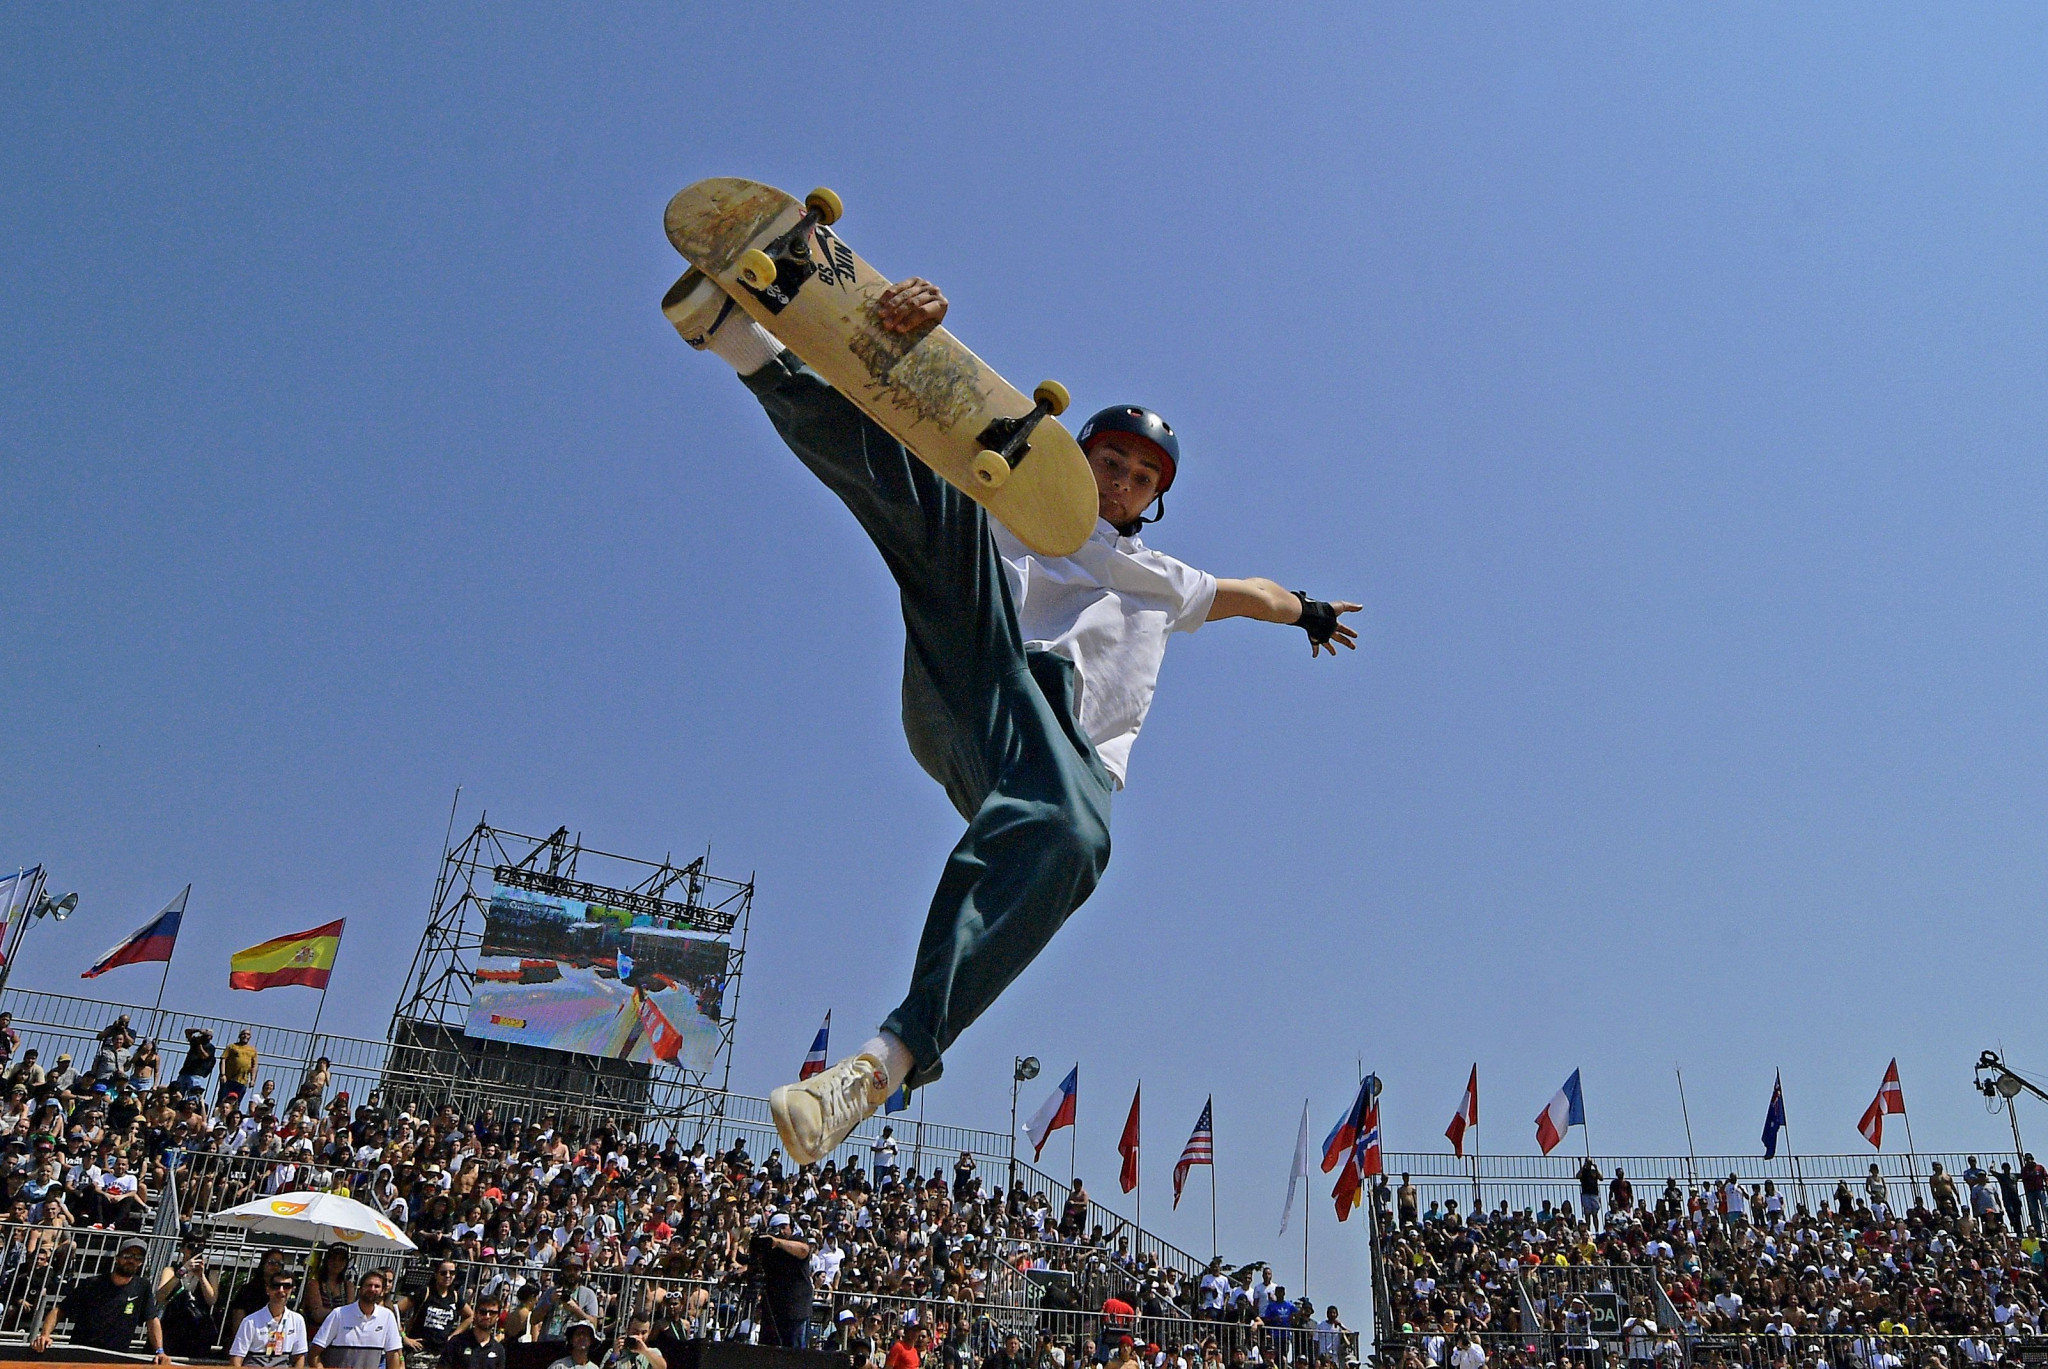 Skateboarding is due to make its Olympic debut at the postponed Tokyo 2020 Games ©Getty Images